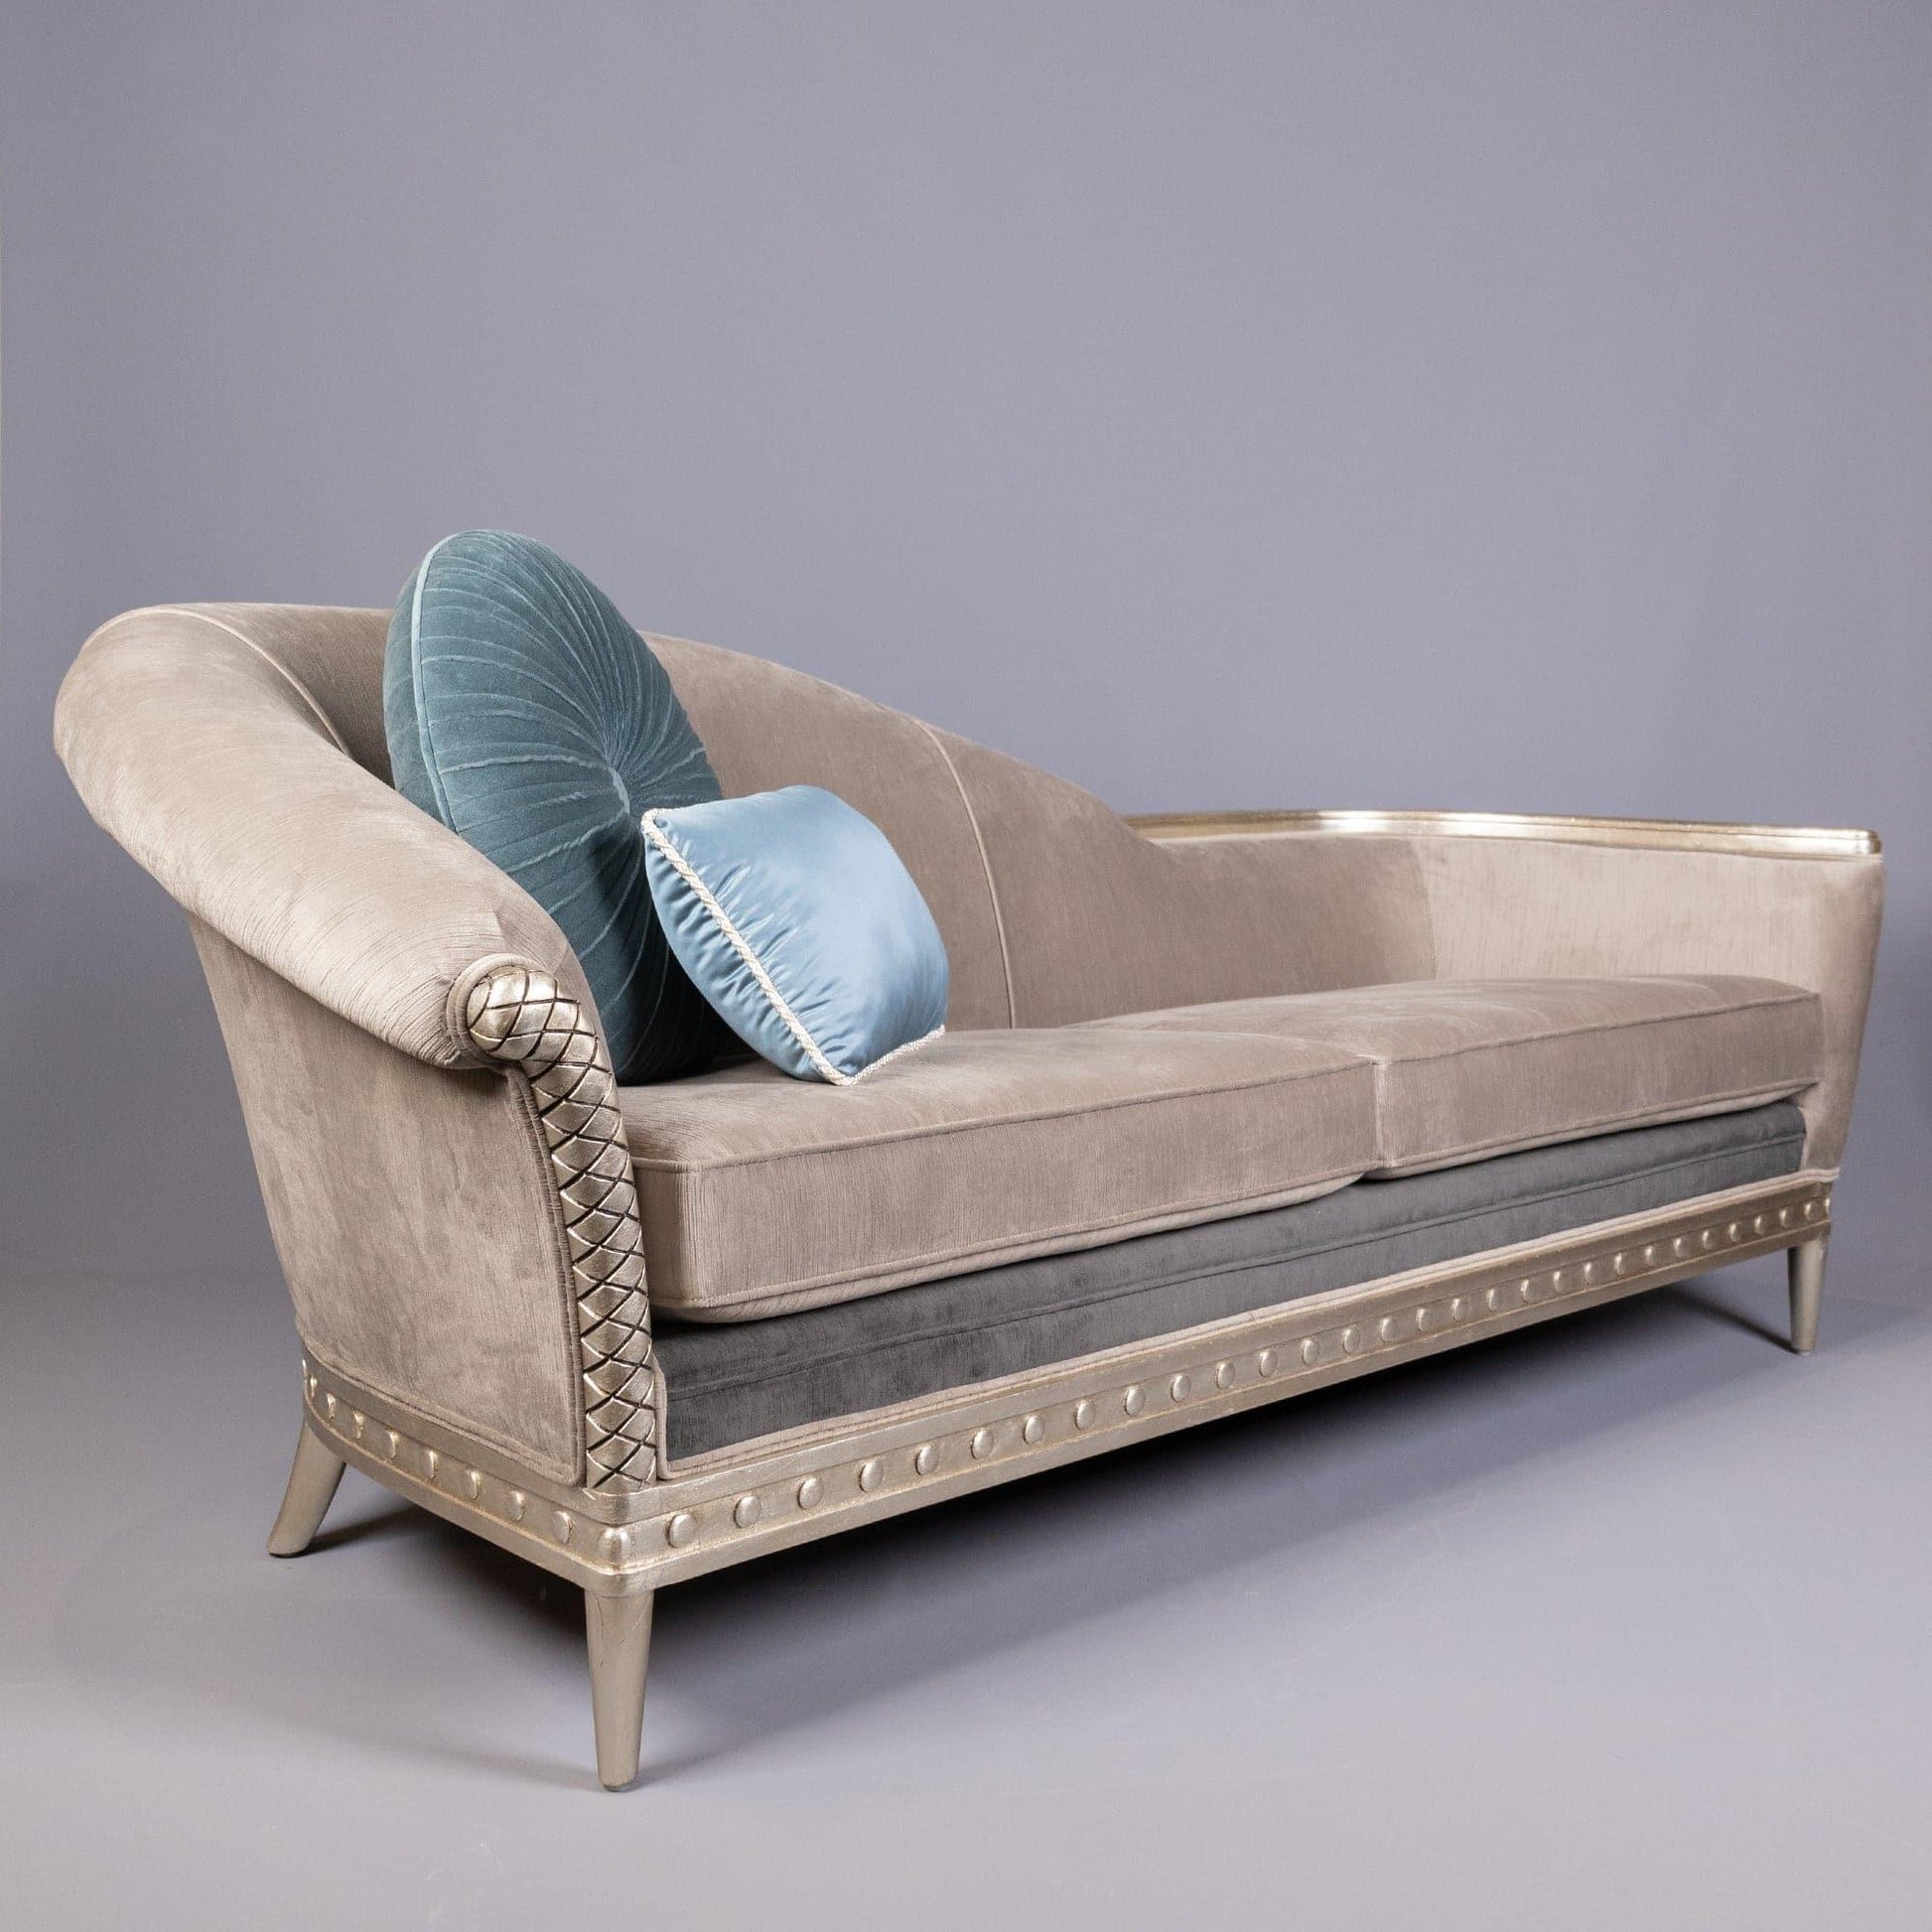 NEOCLASSIC CHAISE LOUNGE - House of Chippendale